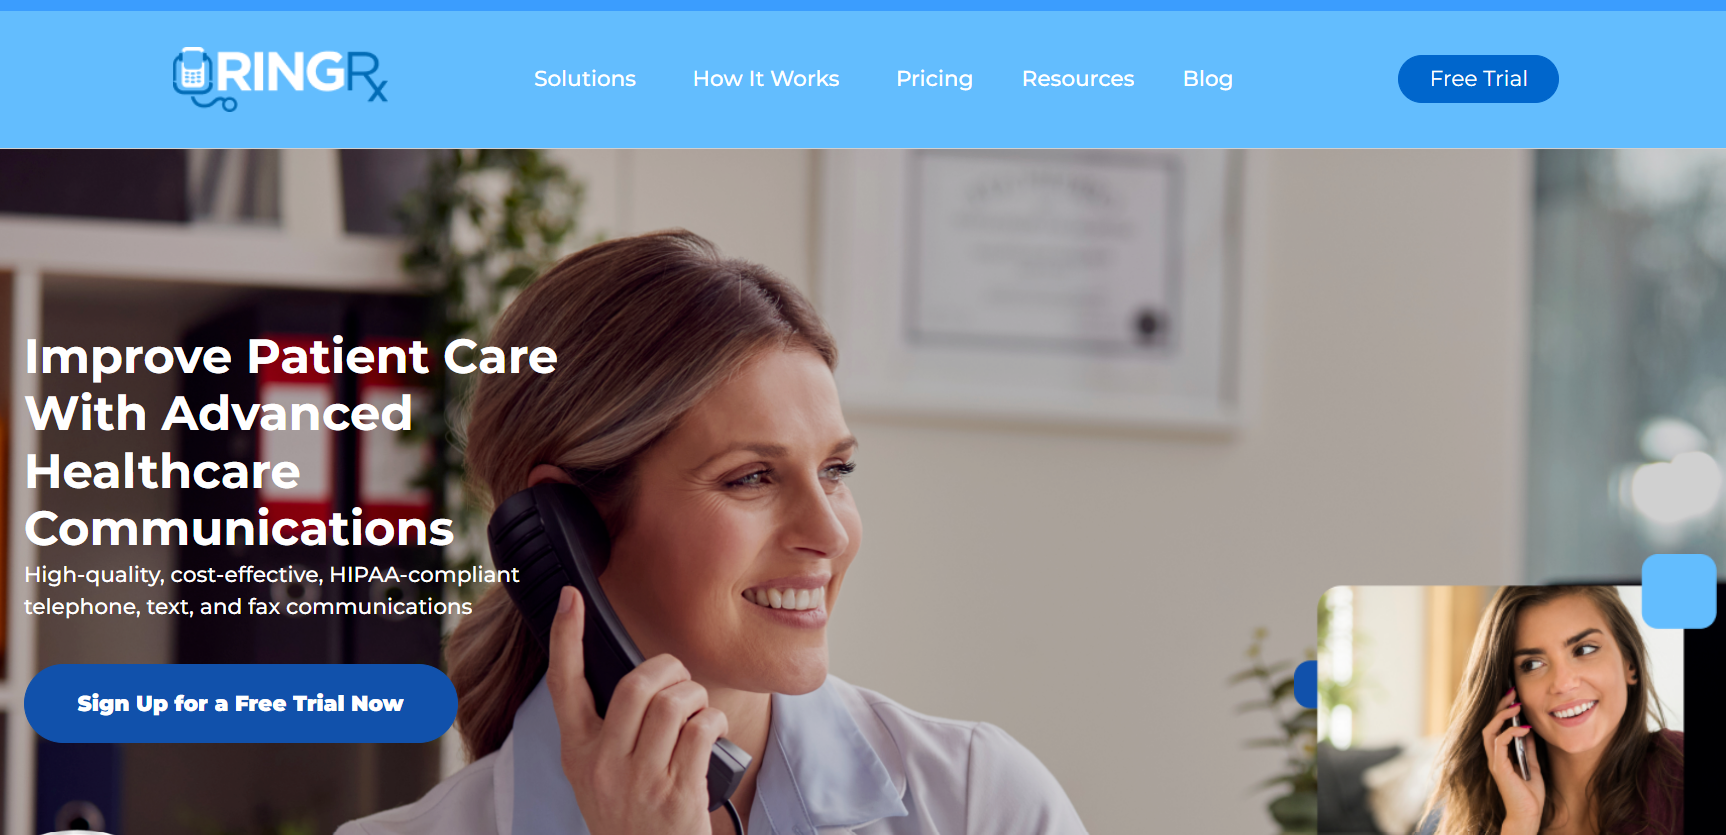 6 Best HIPAA-Compliant VoIP Services